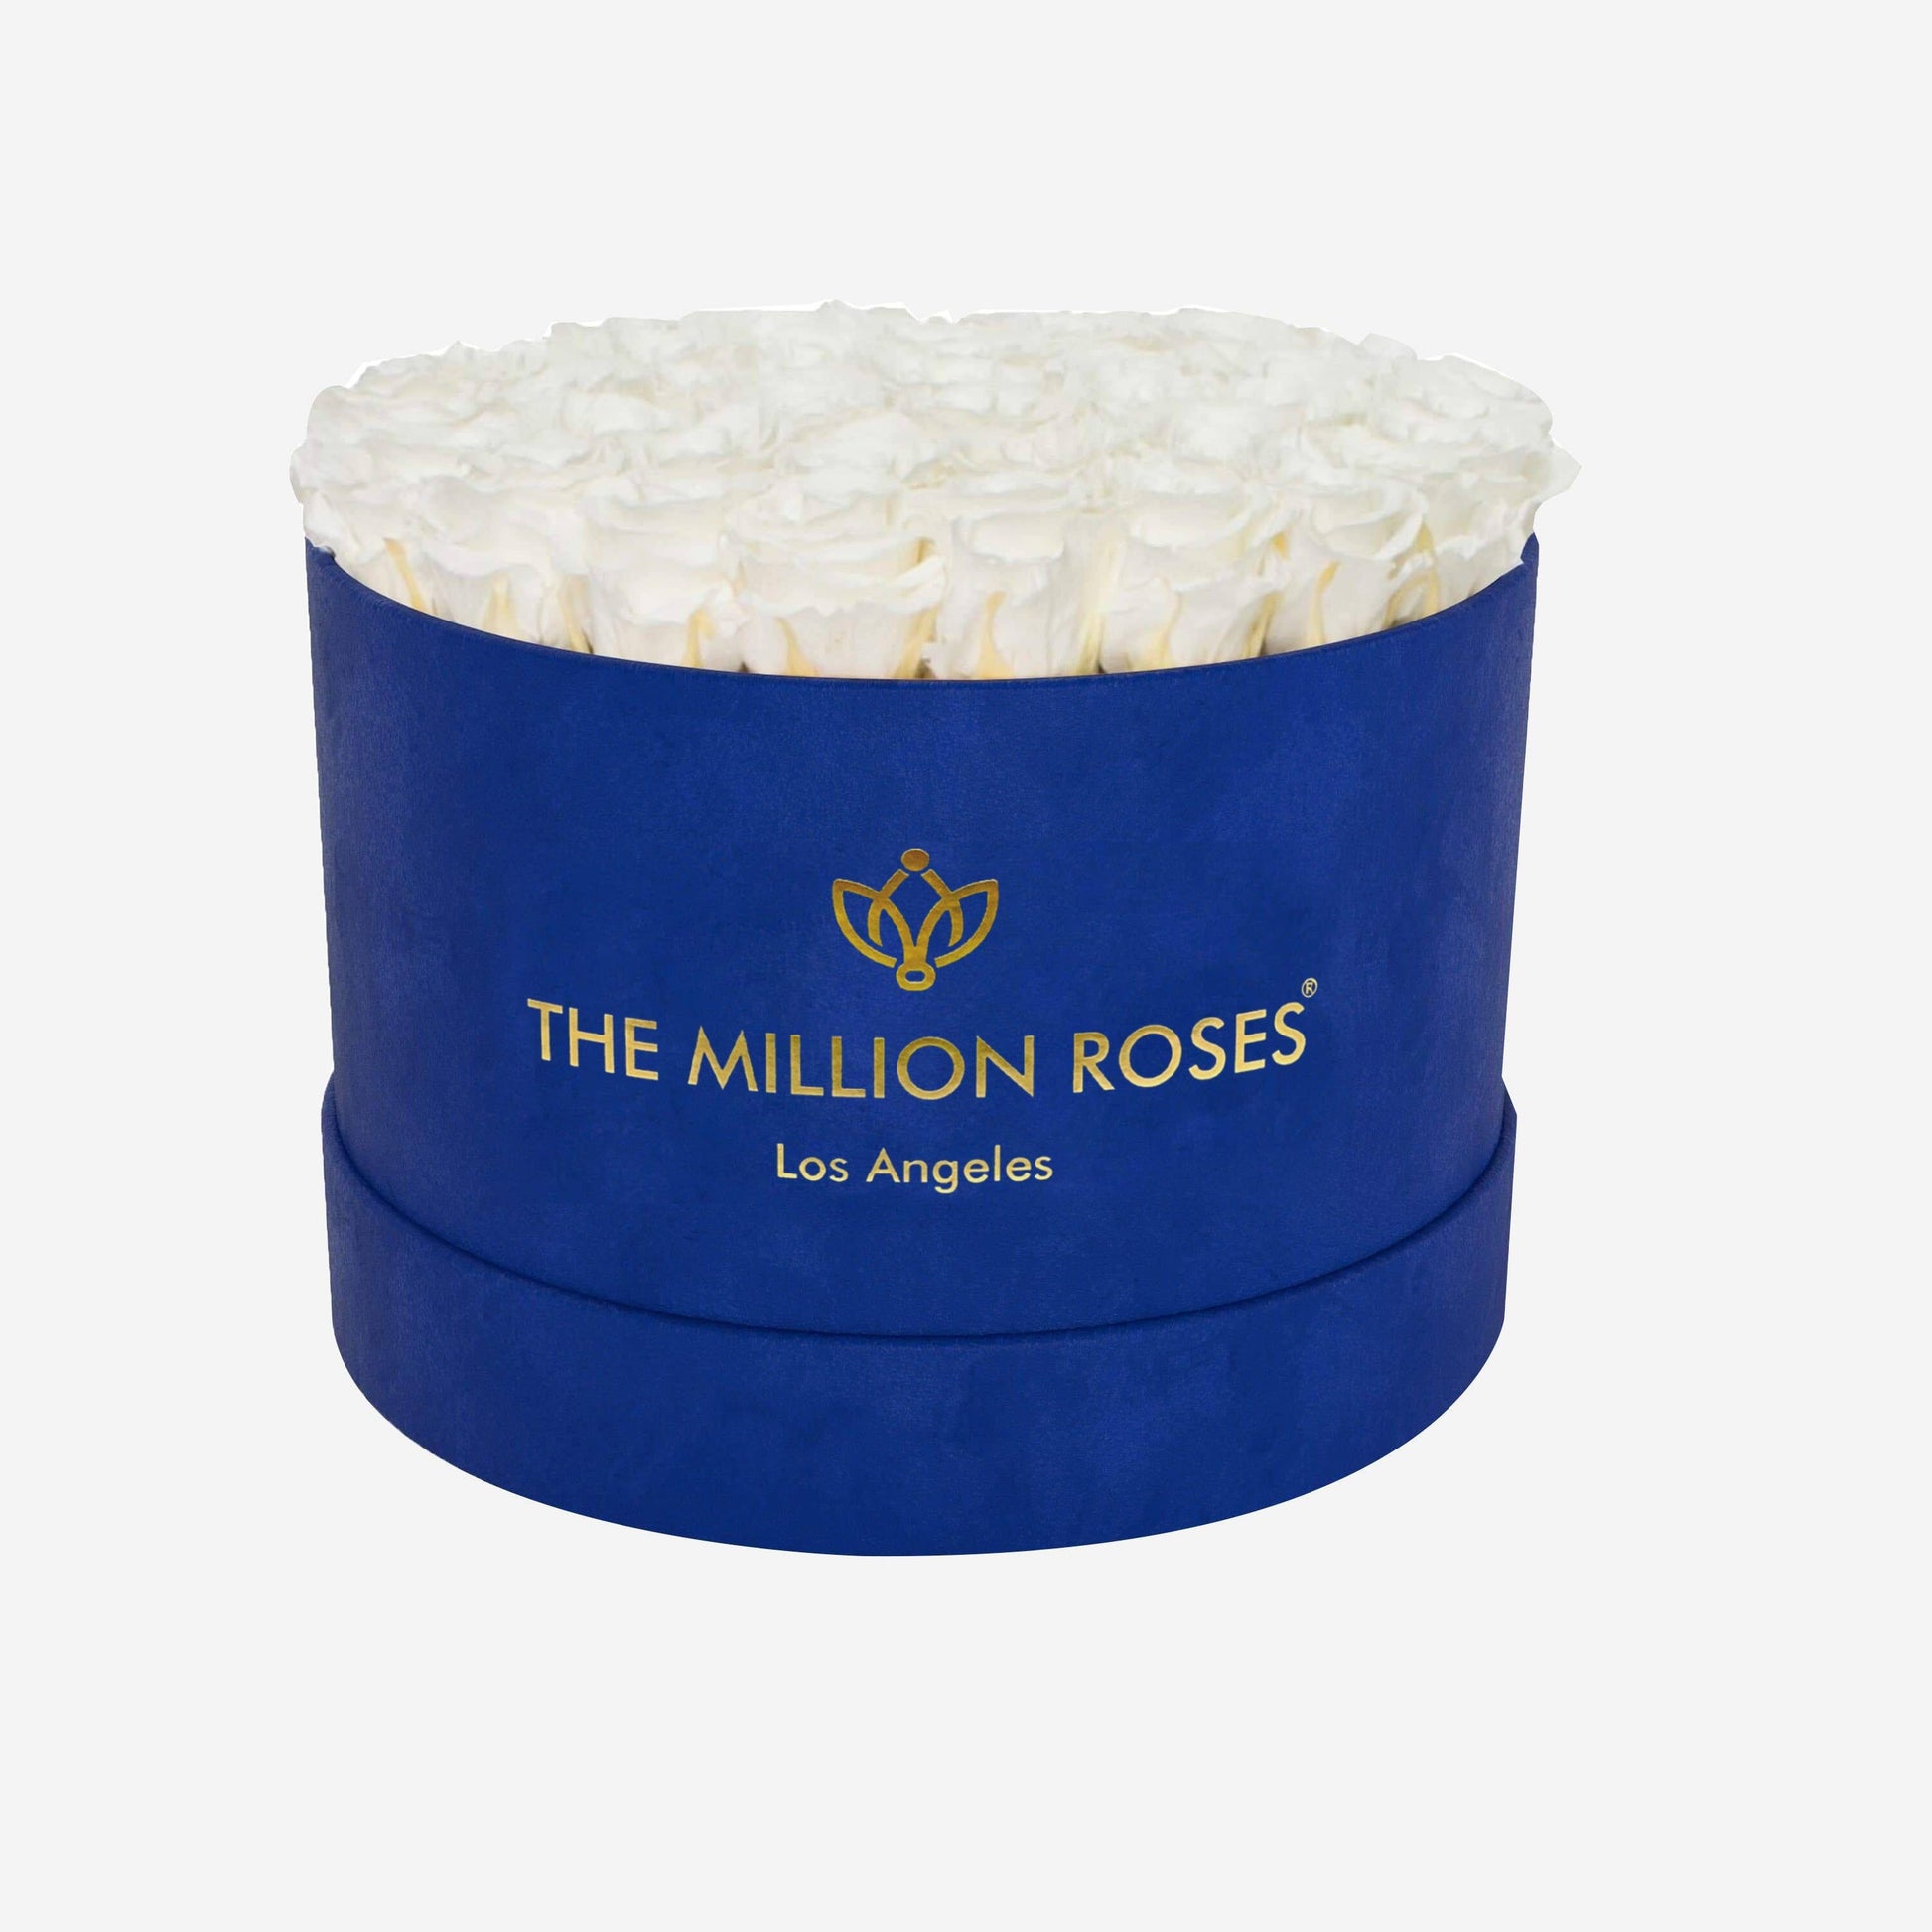 Supreme Royal Blue Suede Box | White Roses - The Million Roses